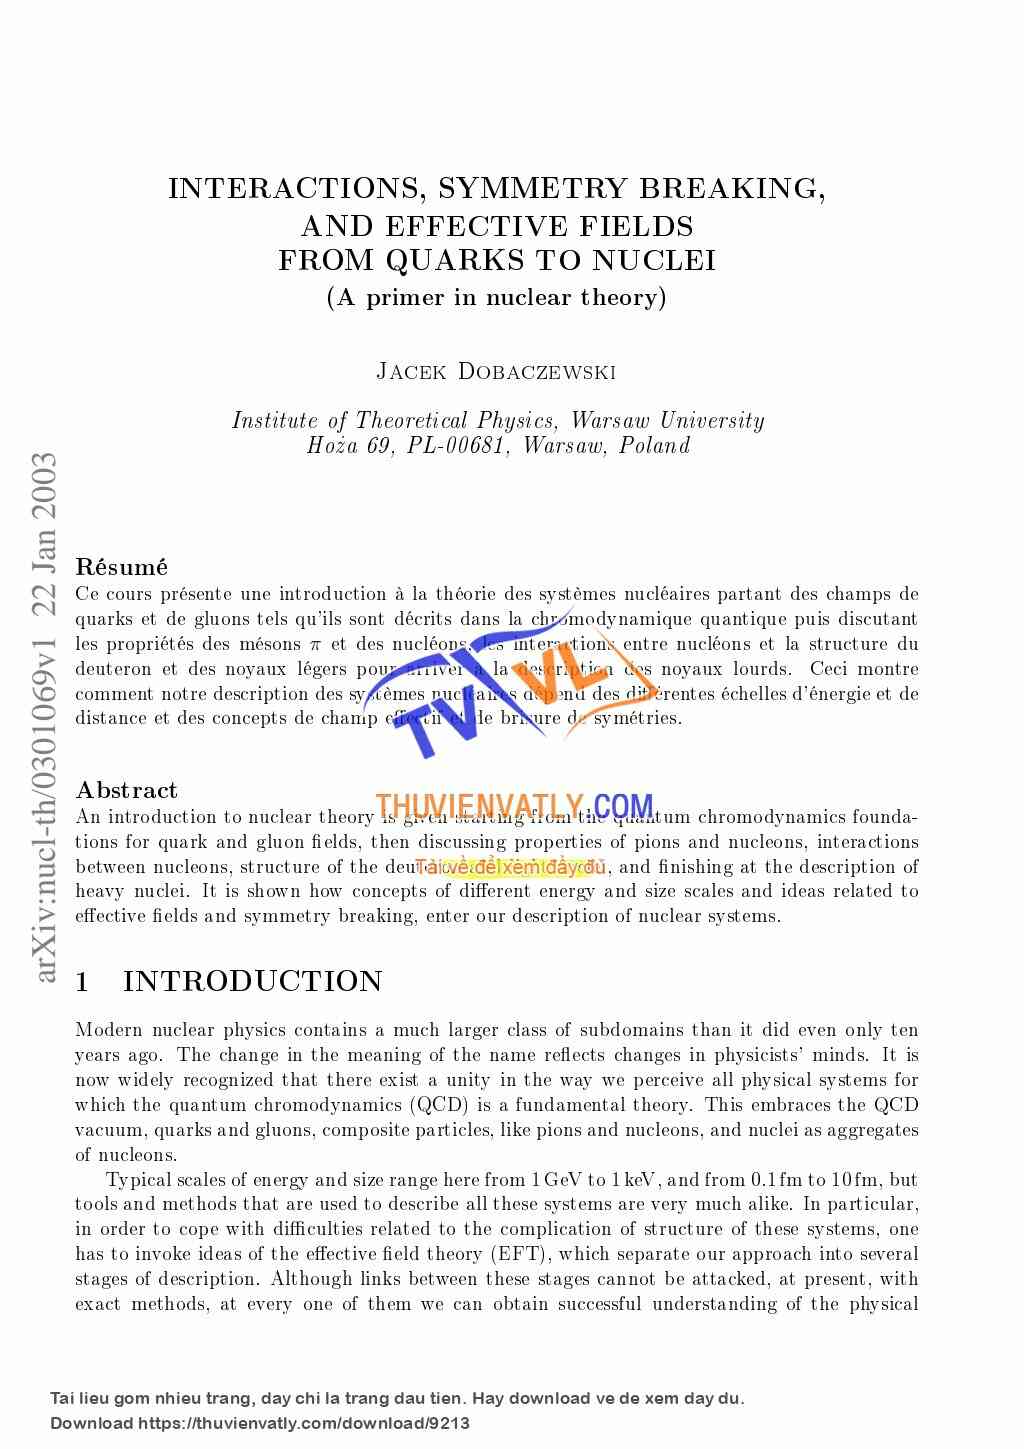 Interactions, Symmetry Breaking, and Effective Fields From Quark to Nuclei